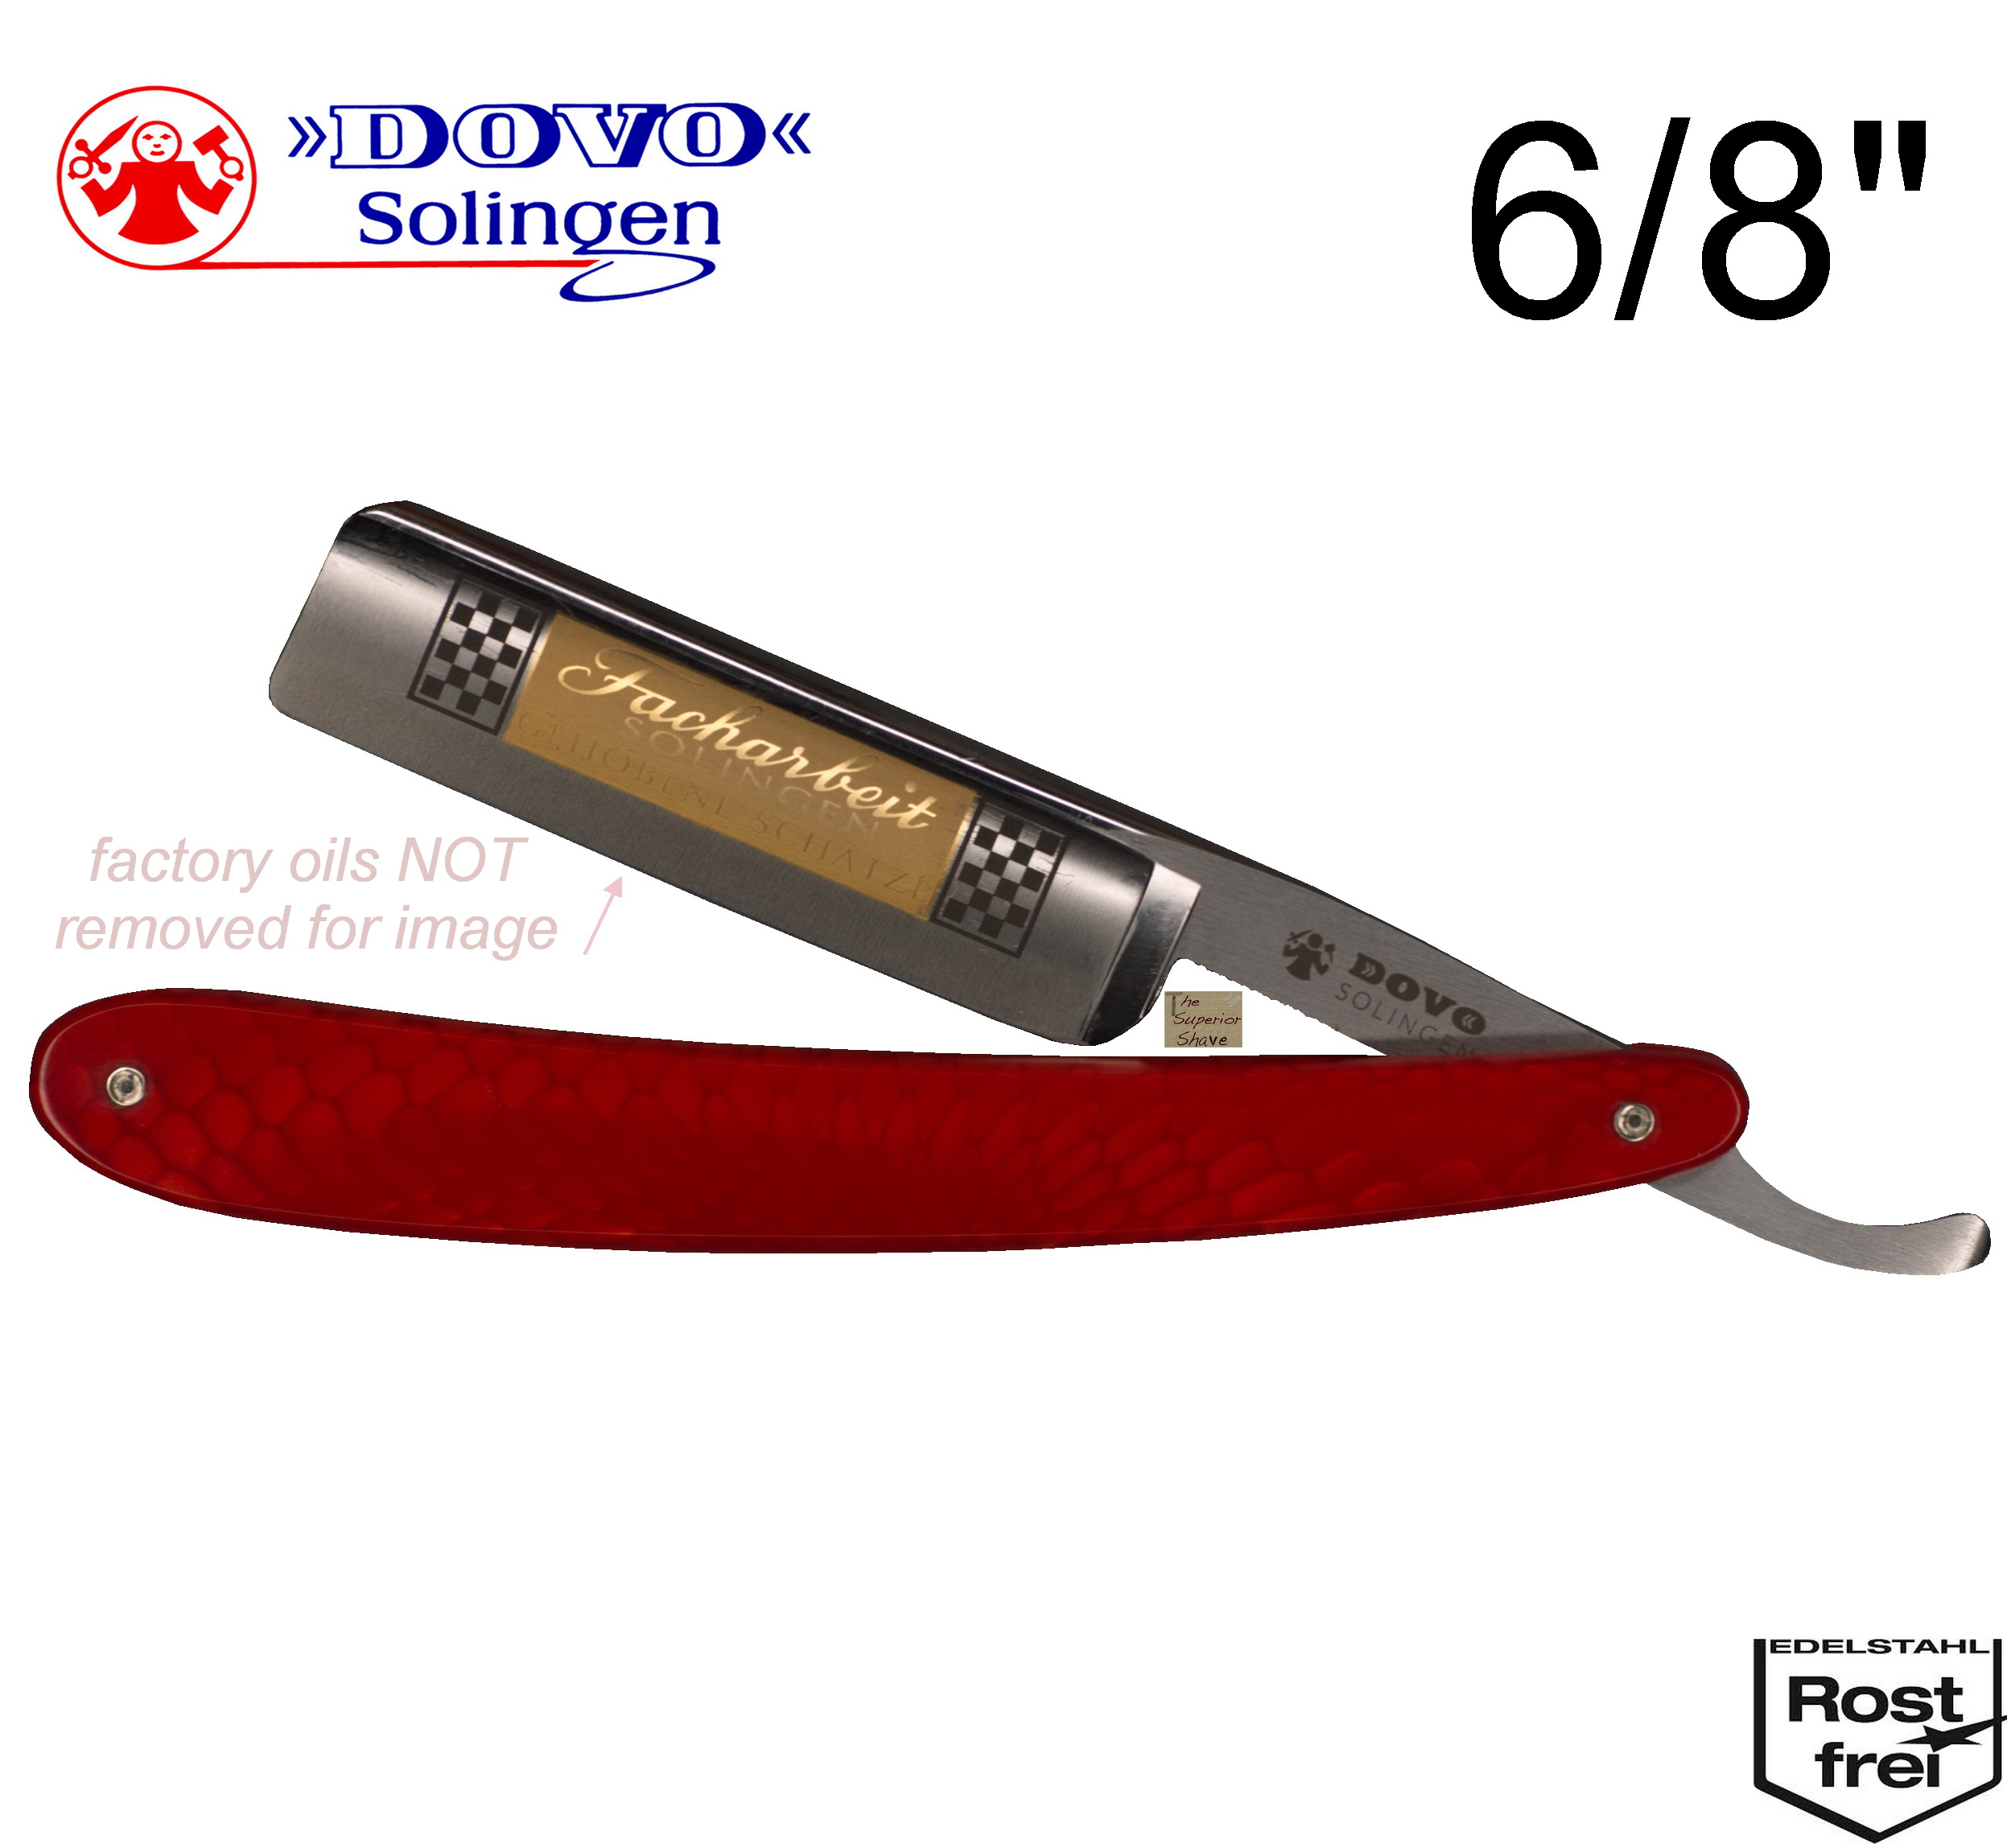 Dovo Facharbeit German Straight Look | | | Stainless Size Steel Acrylic Square Point | Reptile Hollow | Ground | | 1967-1971 Razor Red HISTORIC Handle, 136813315 in Made Full Germany 6/8